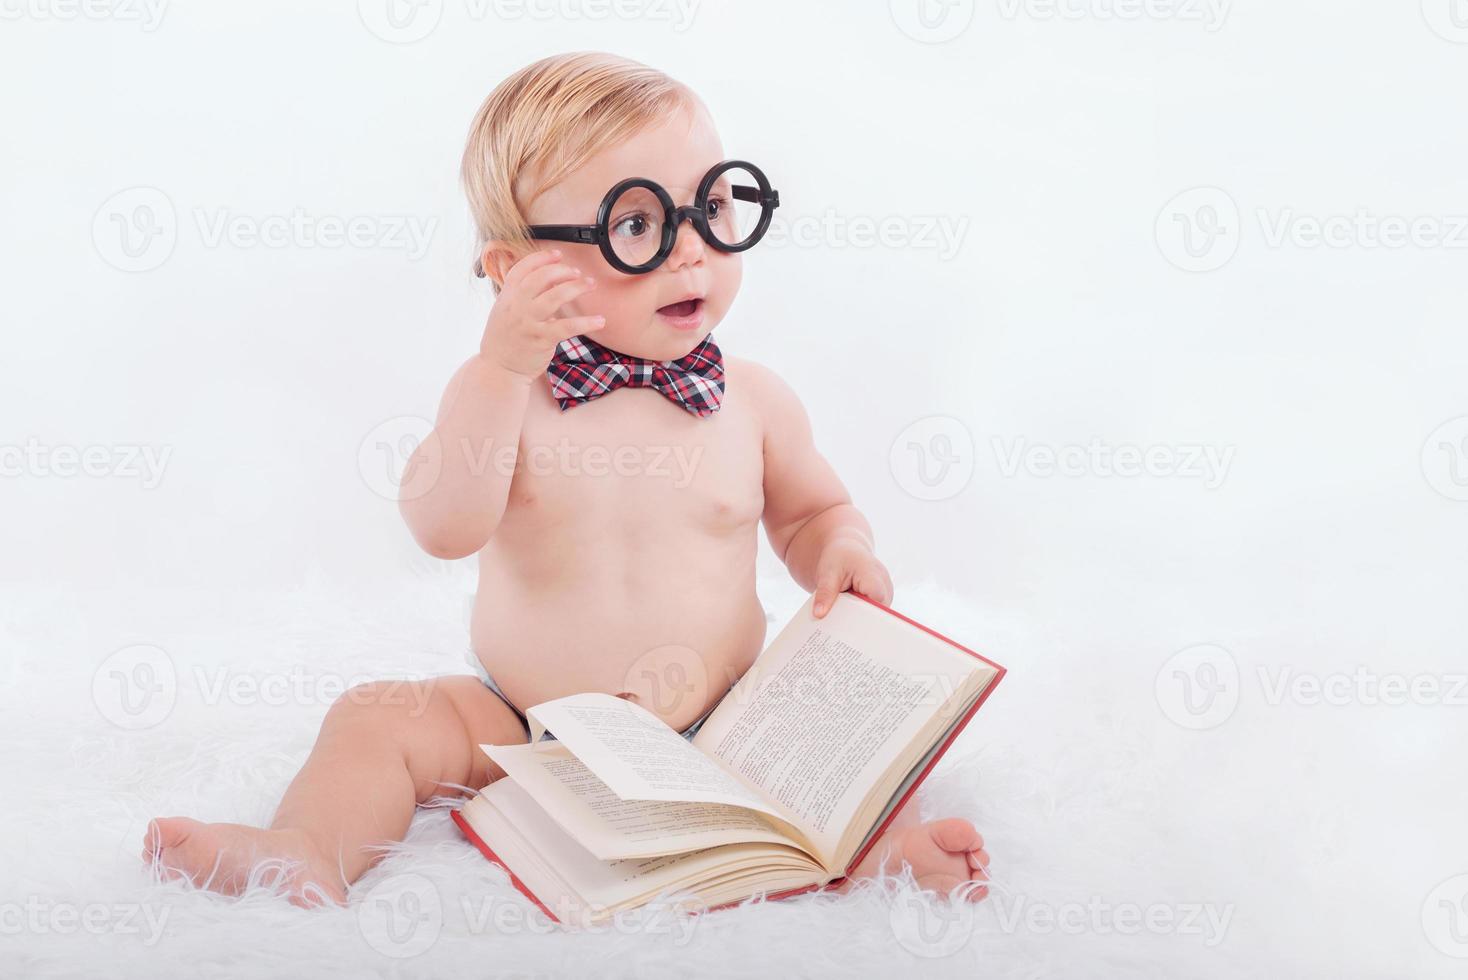 Baby reading a book photo